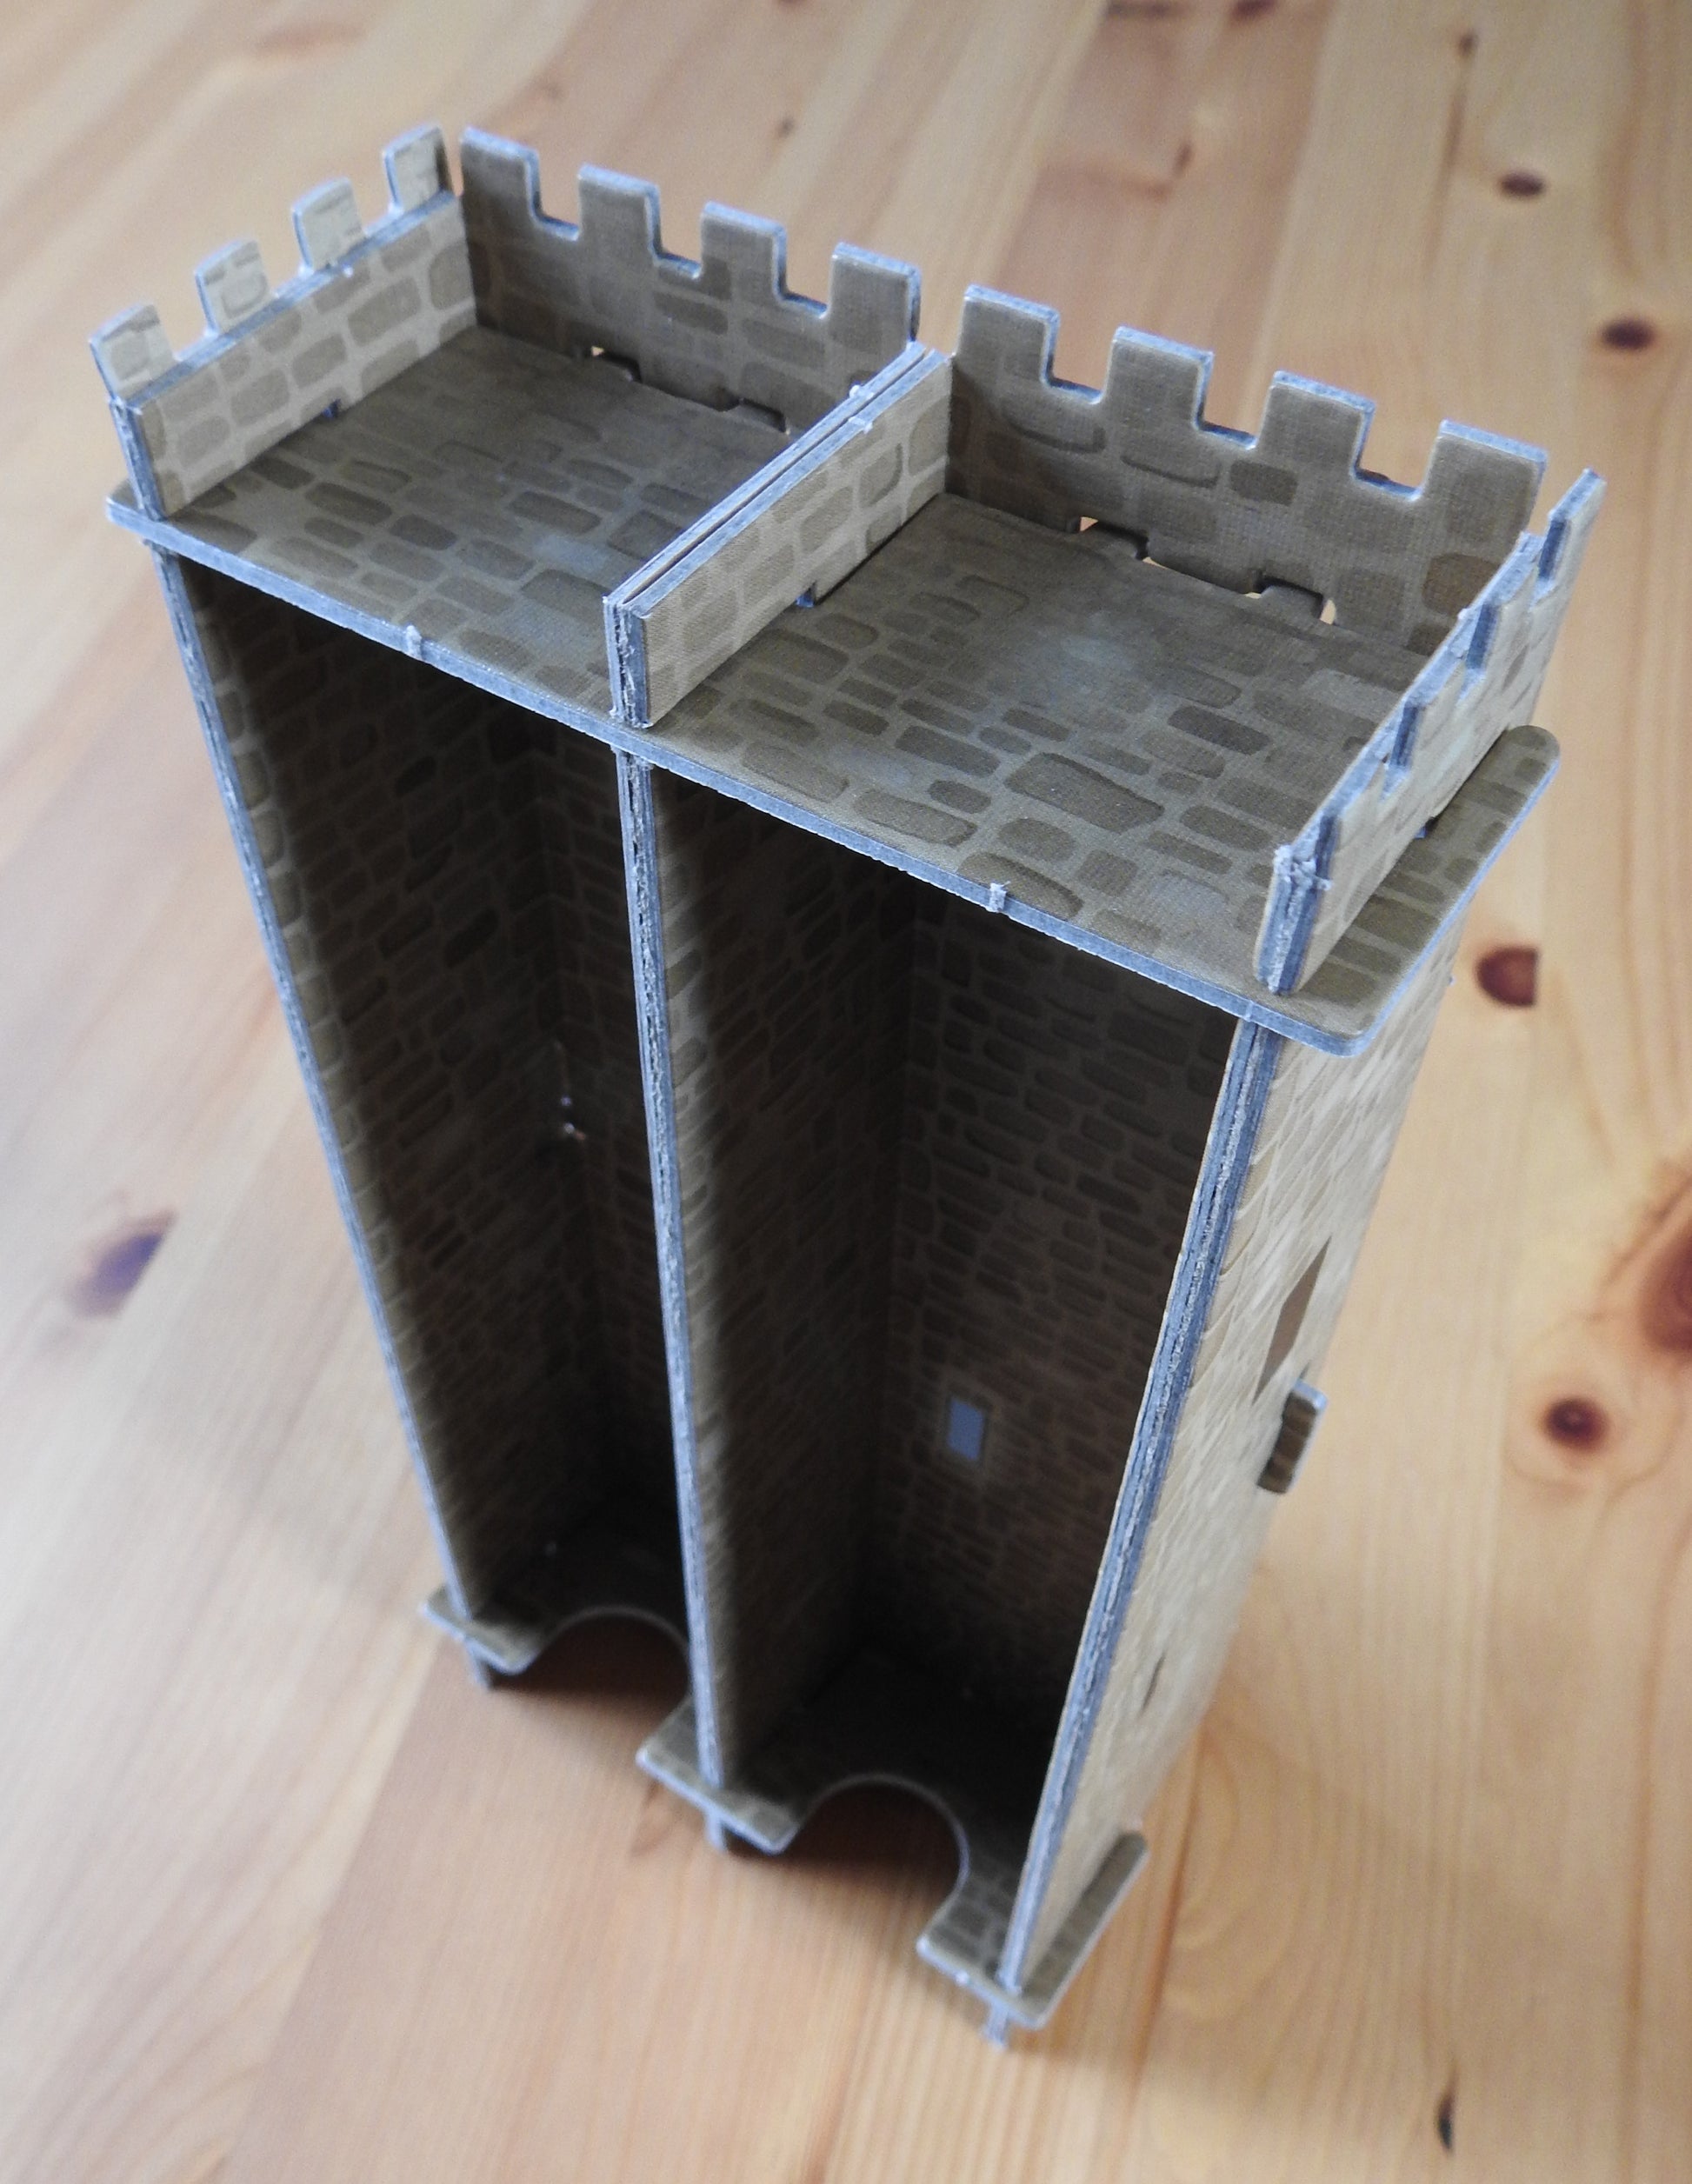 View showing the front of the Tile Tower accessory for Carcassonne.